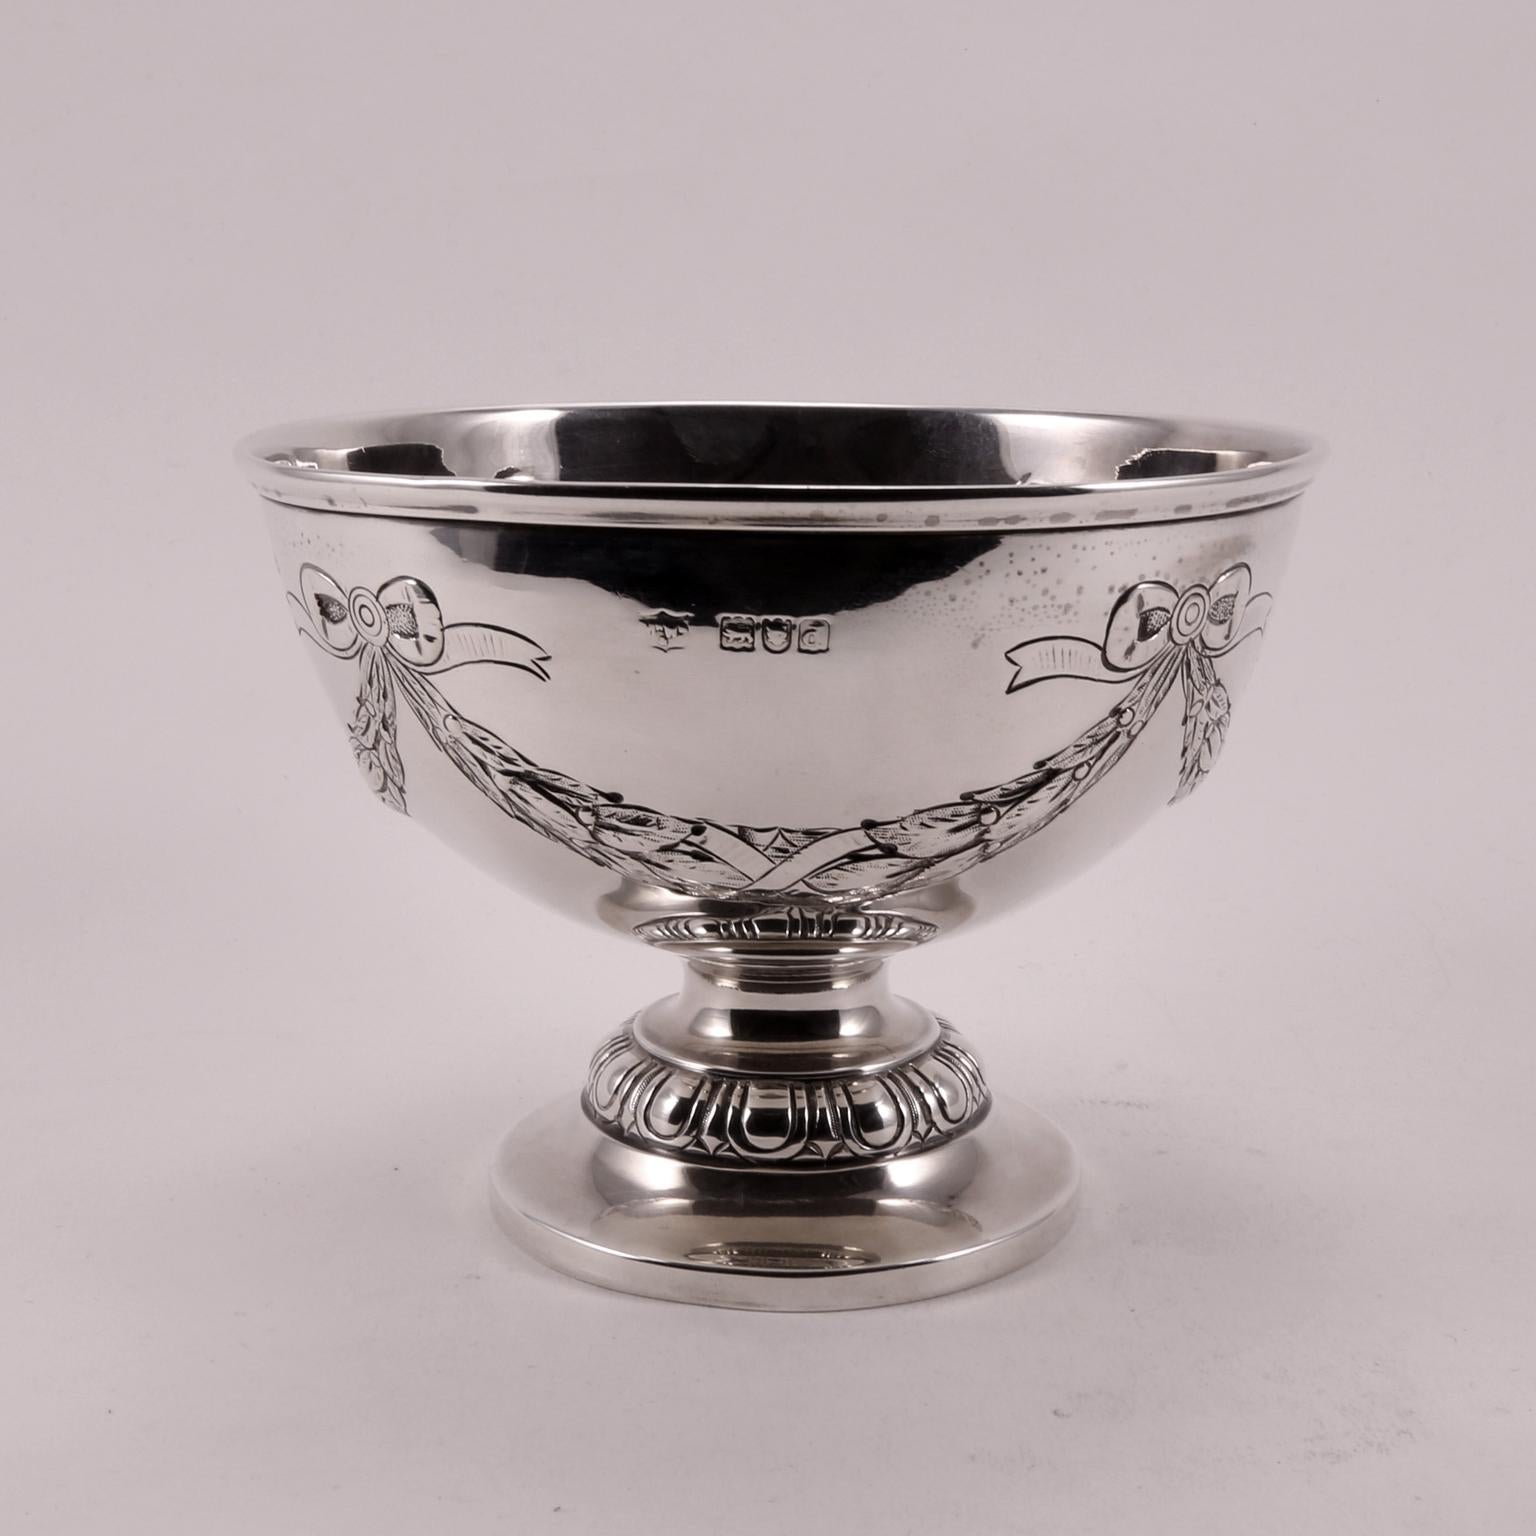 19th Century Mappin Webb Silver Bowl Decorated with Flackes and Flowers (Handgefertigt) im Angebot